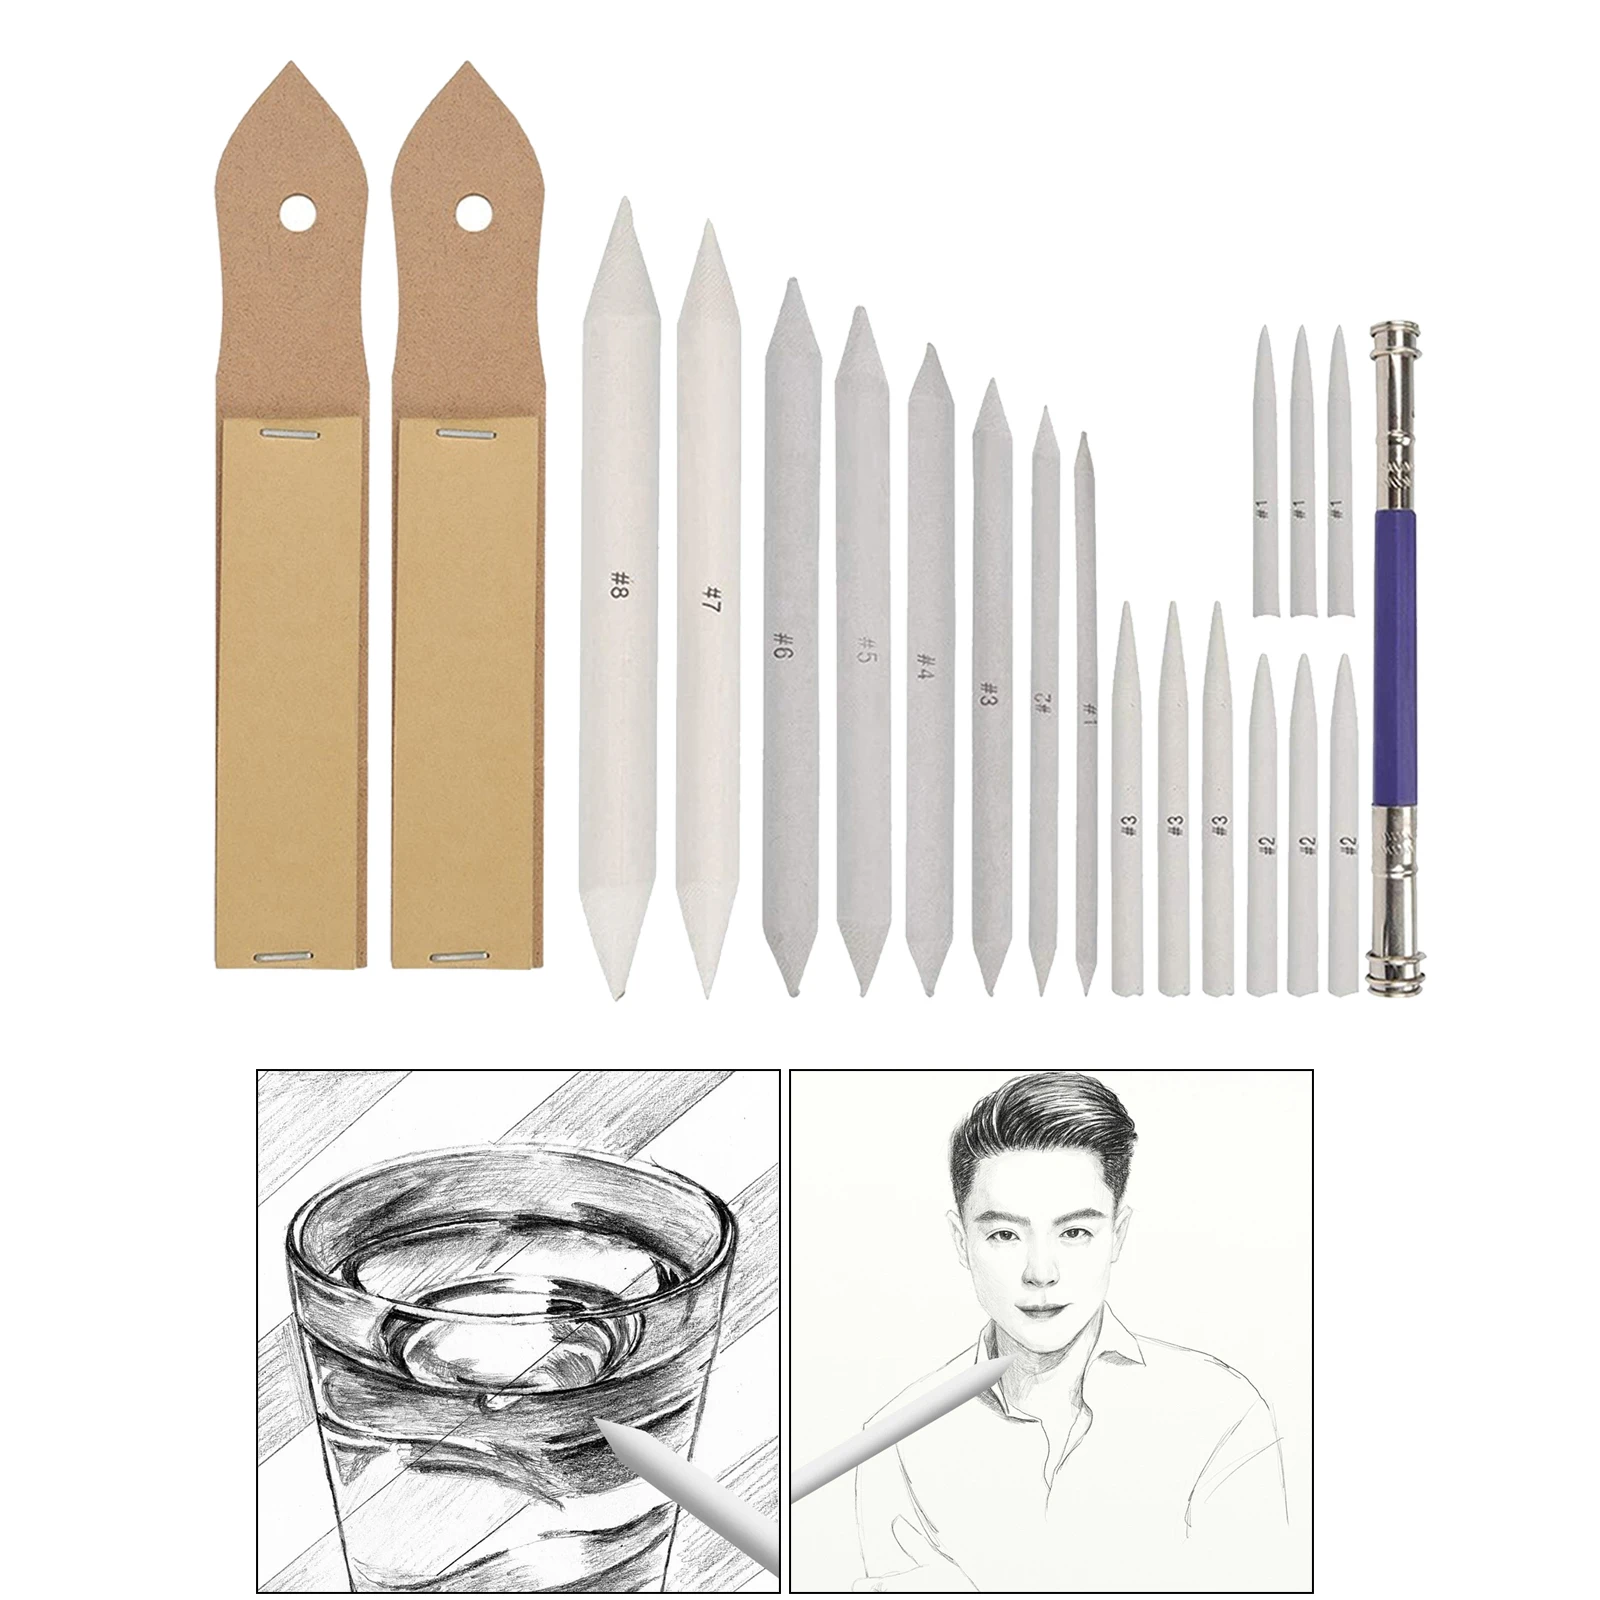 8 Pieces Blending Stumps and Tortillions Set with 2 Pieces Sandpaper Pencil Sharpener for Student Sketch Drawing By DINGJIN 